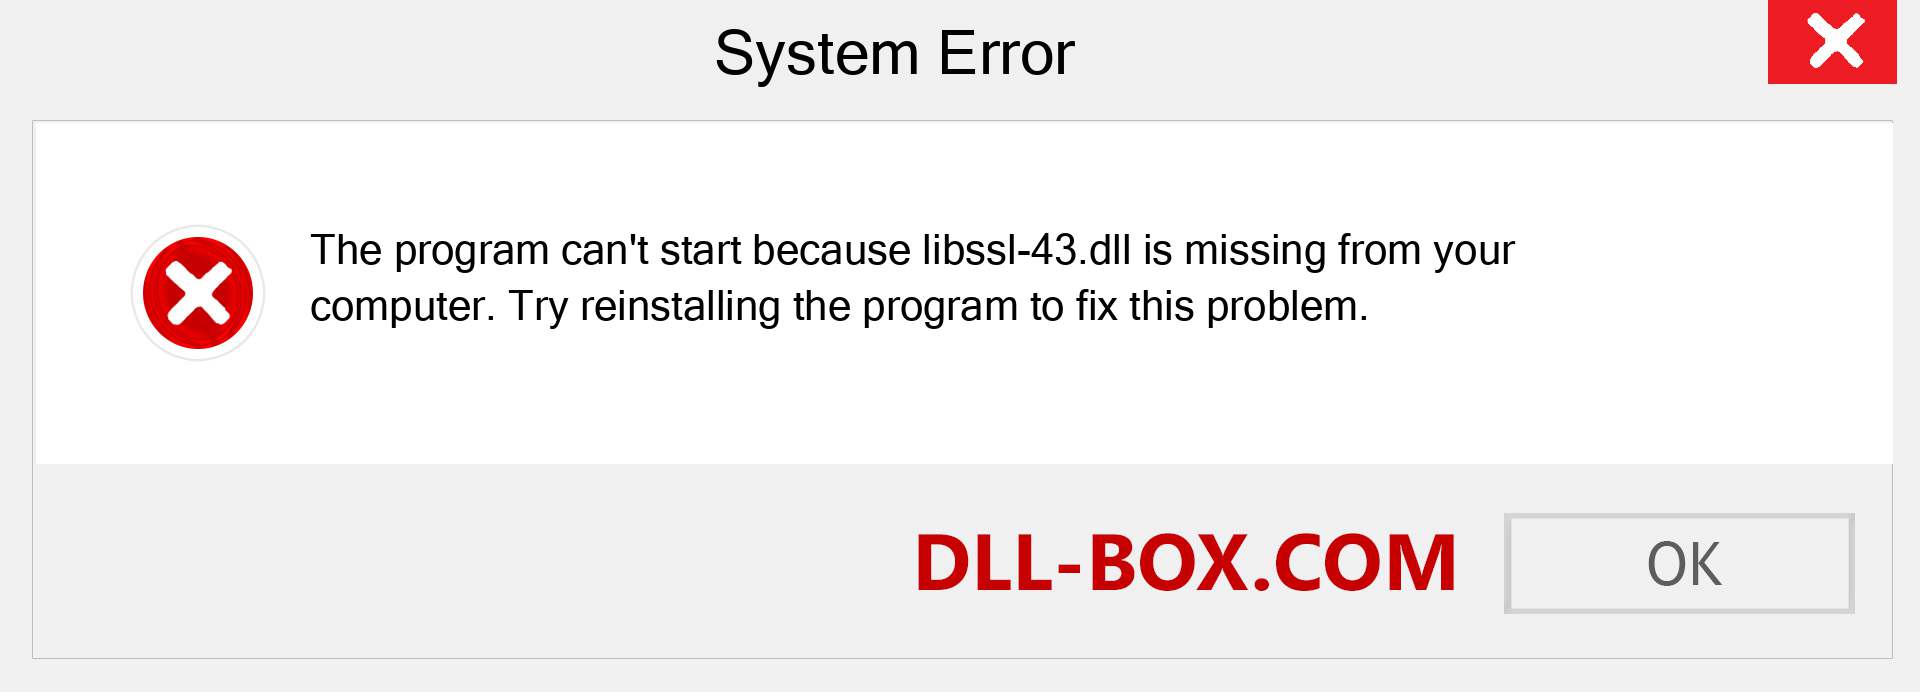  libssl-43.dll file is missing?. Download for Windows 7, 8, 10 - Fix  libssl-43 dll Missing Error on Windows, photos, images